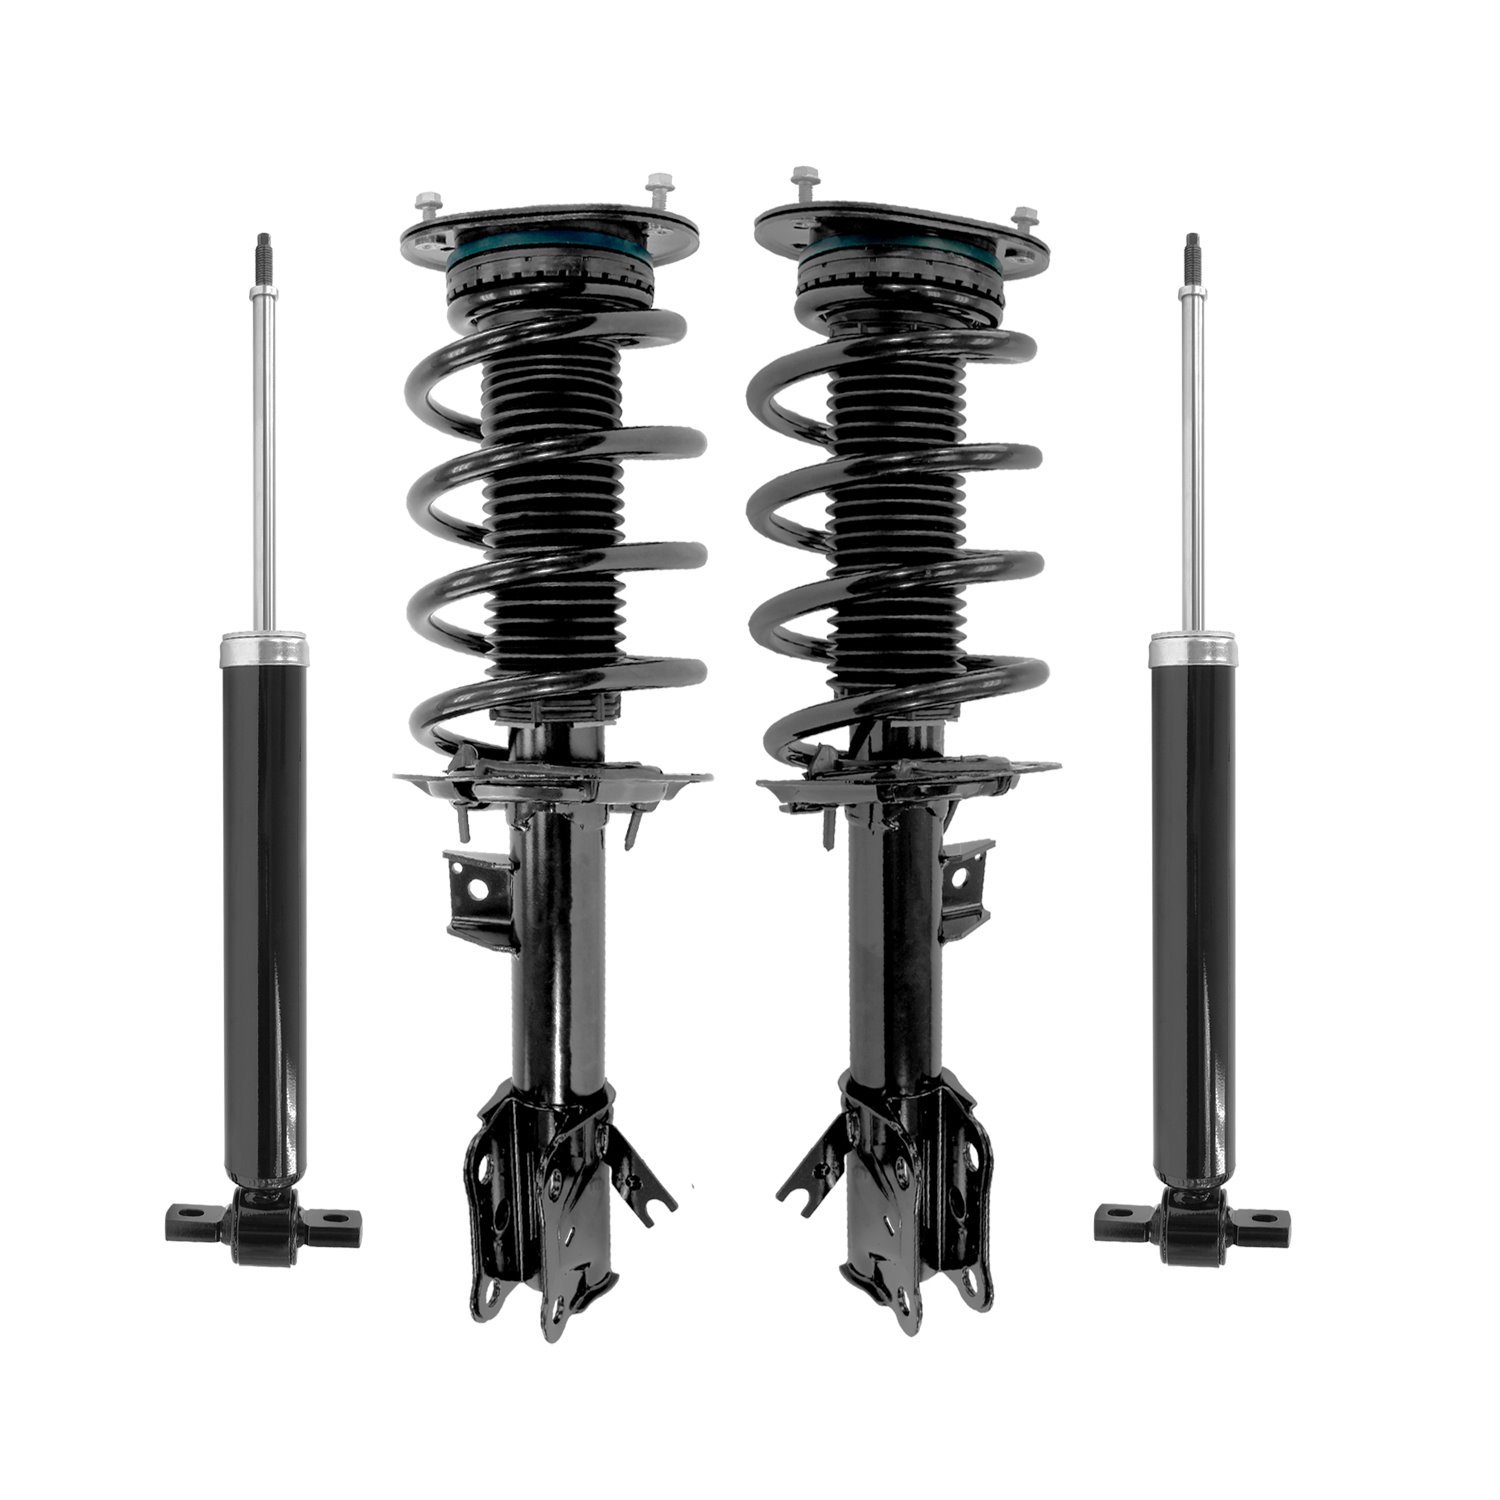 4-13521-252240-001 Suspension Strut & Coil Spring Assembly Fits Select Ford Edge, Lincoln Nautilus, Lincoln MKX